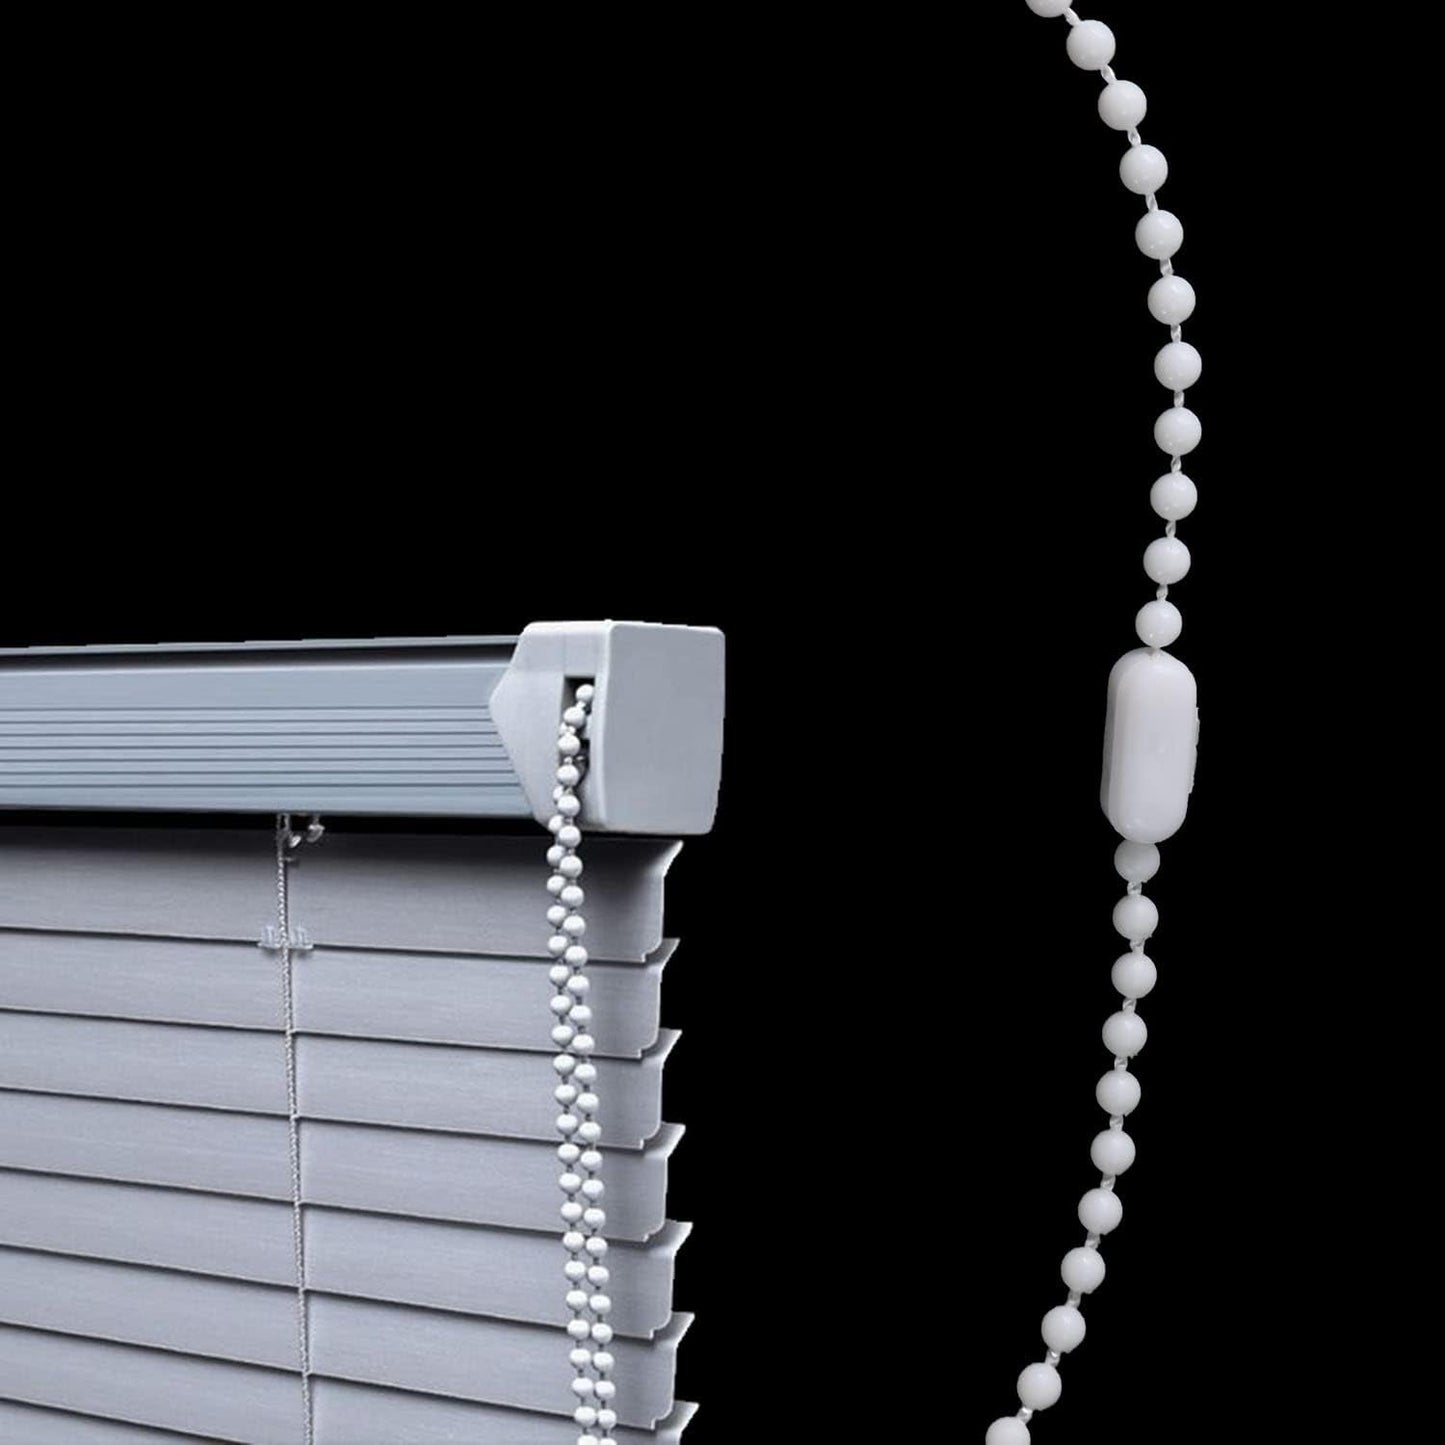 Blinds Pull Bead Chain Repairer Kit 10 Meter 10.94 Yards Plastic Roller Blind Roman Vertical Shade Beaded Chain Pull Cord Window Curtain Beads Rope with 10Pcs Connectors, White